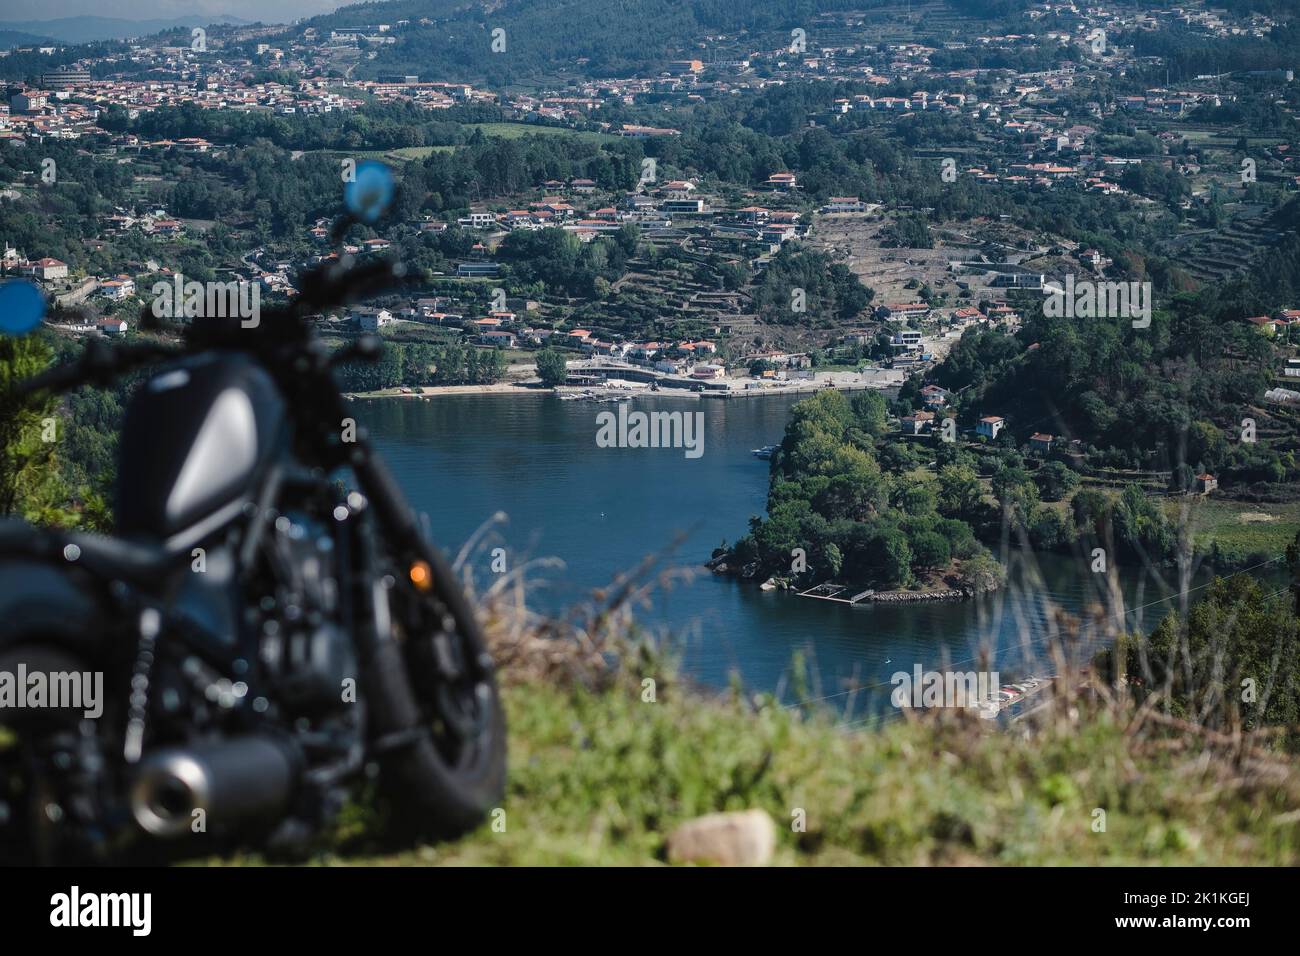 View of the Douro River, in the Douro Valley, Porto, Portugal. In the foreground is a blurred tourist motorcycle. Stock Photo